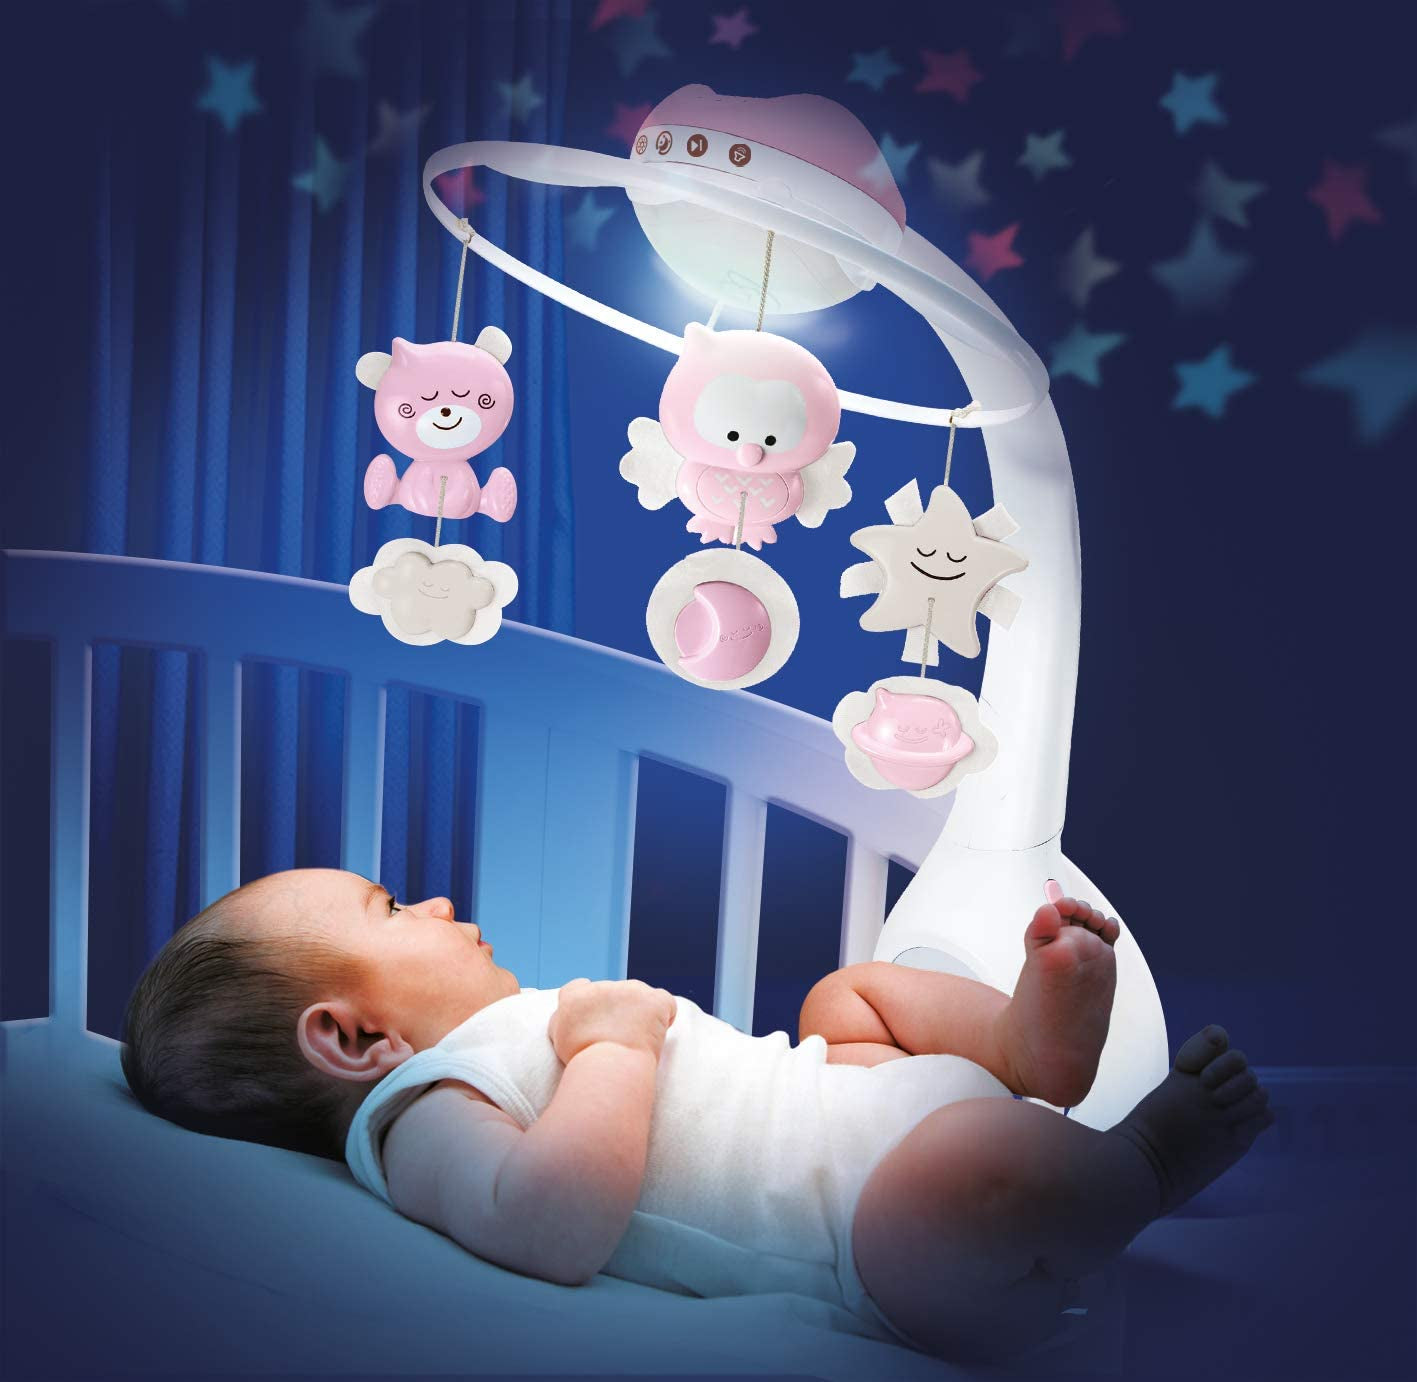 INFANTINO 3 in 1 Projector Musical Mobile - Convertible mobile, table and cot light and projector, with wake up mode to simulate daylight, complete with 6 melodies and 4 nature sounds, in pink